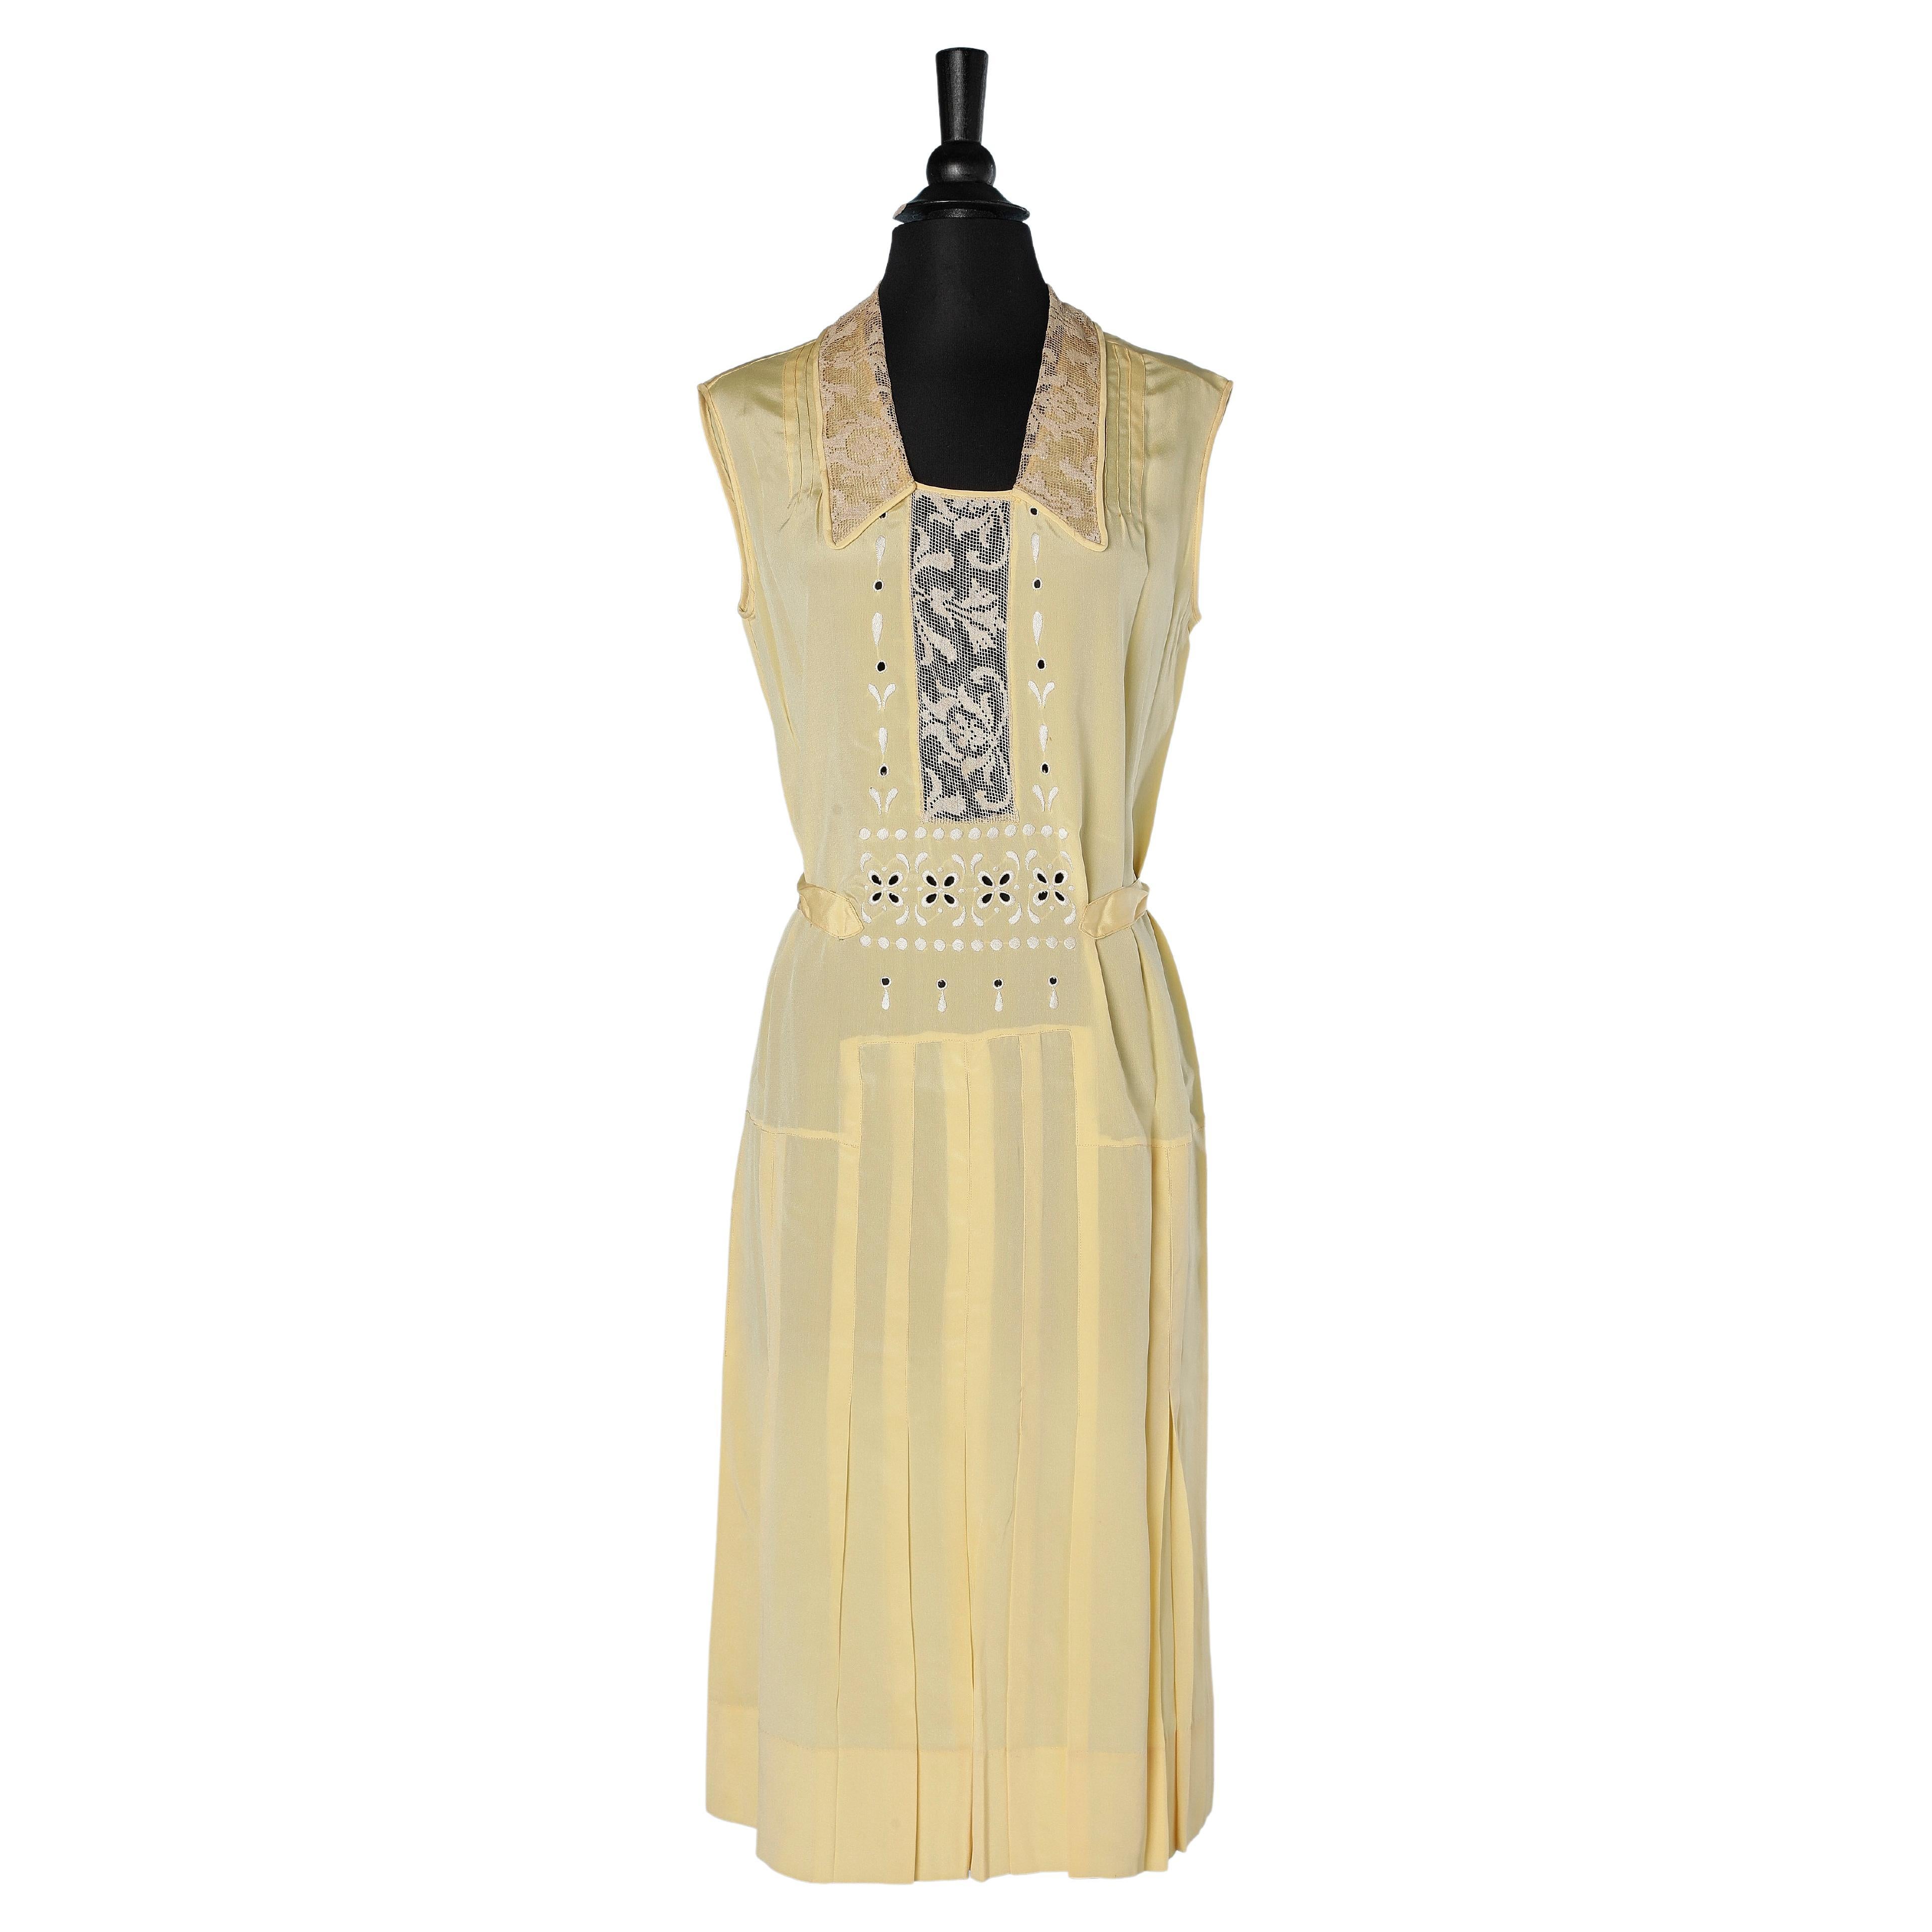 Pale yellow silk dress with lace appliqué and ivory silk thread Circa 1920